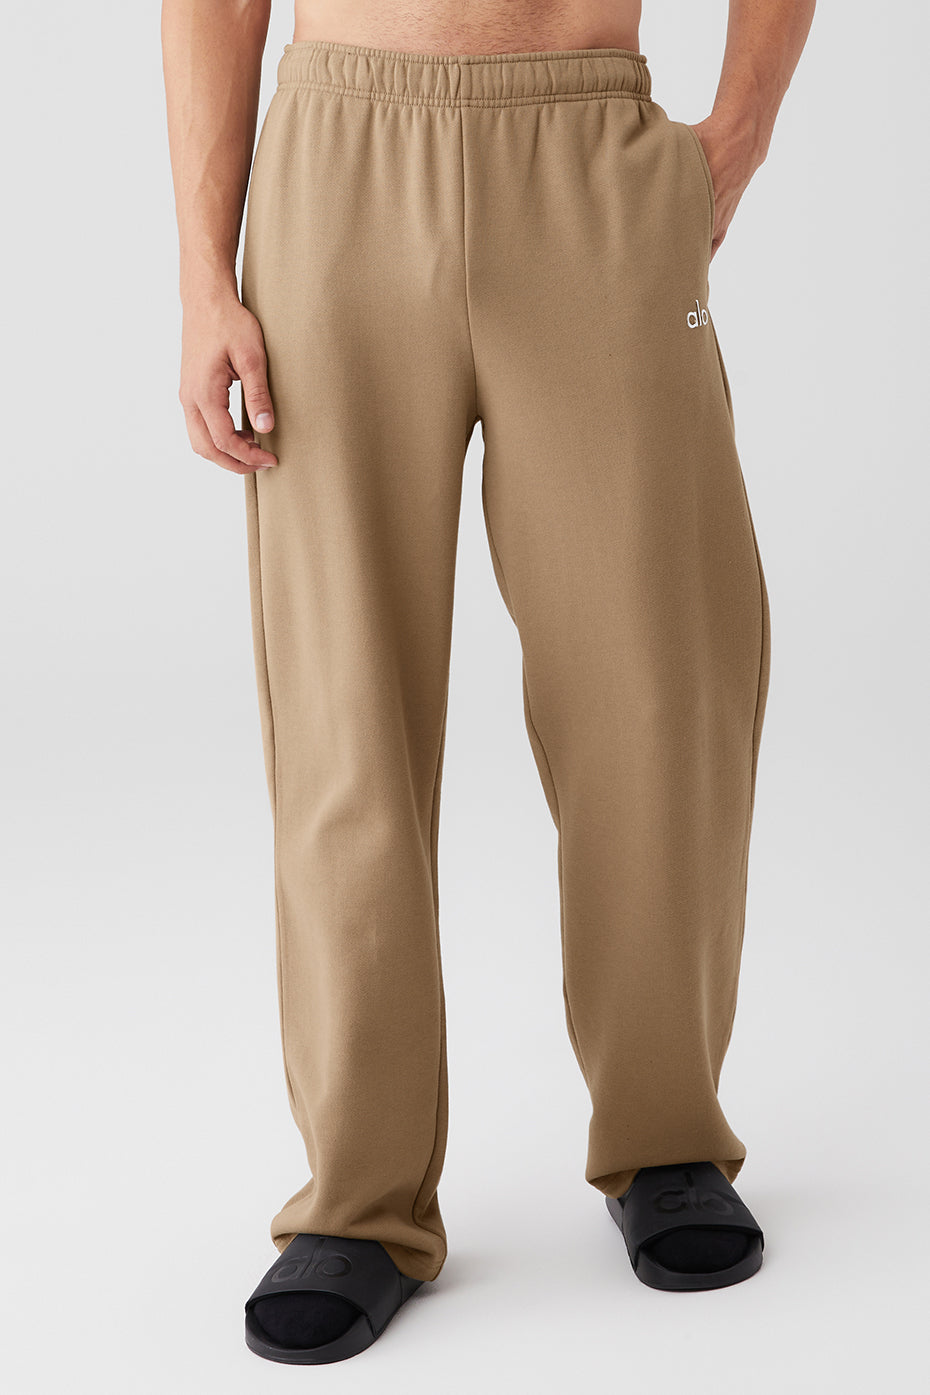 Beige Conquer Revitalize Lounge Pants by Alo on Sale